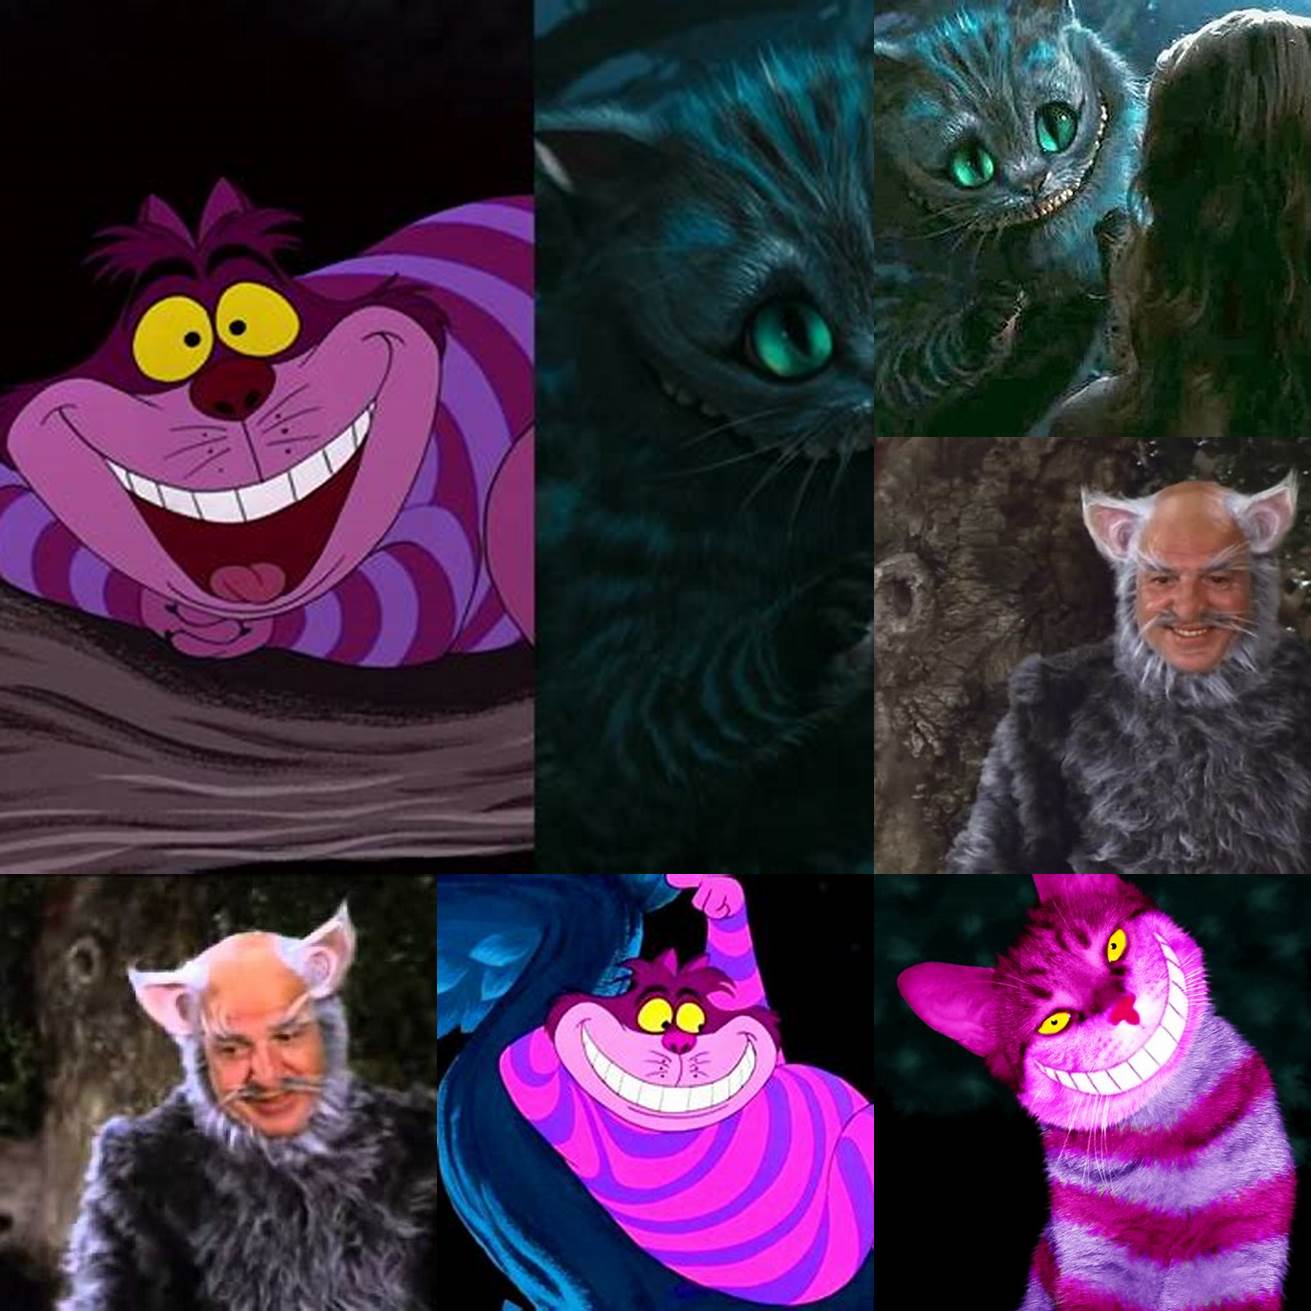 The Cheshire Cat has been portrayed by several famous actors